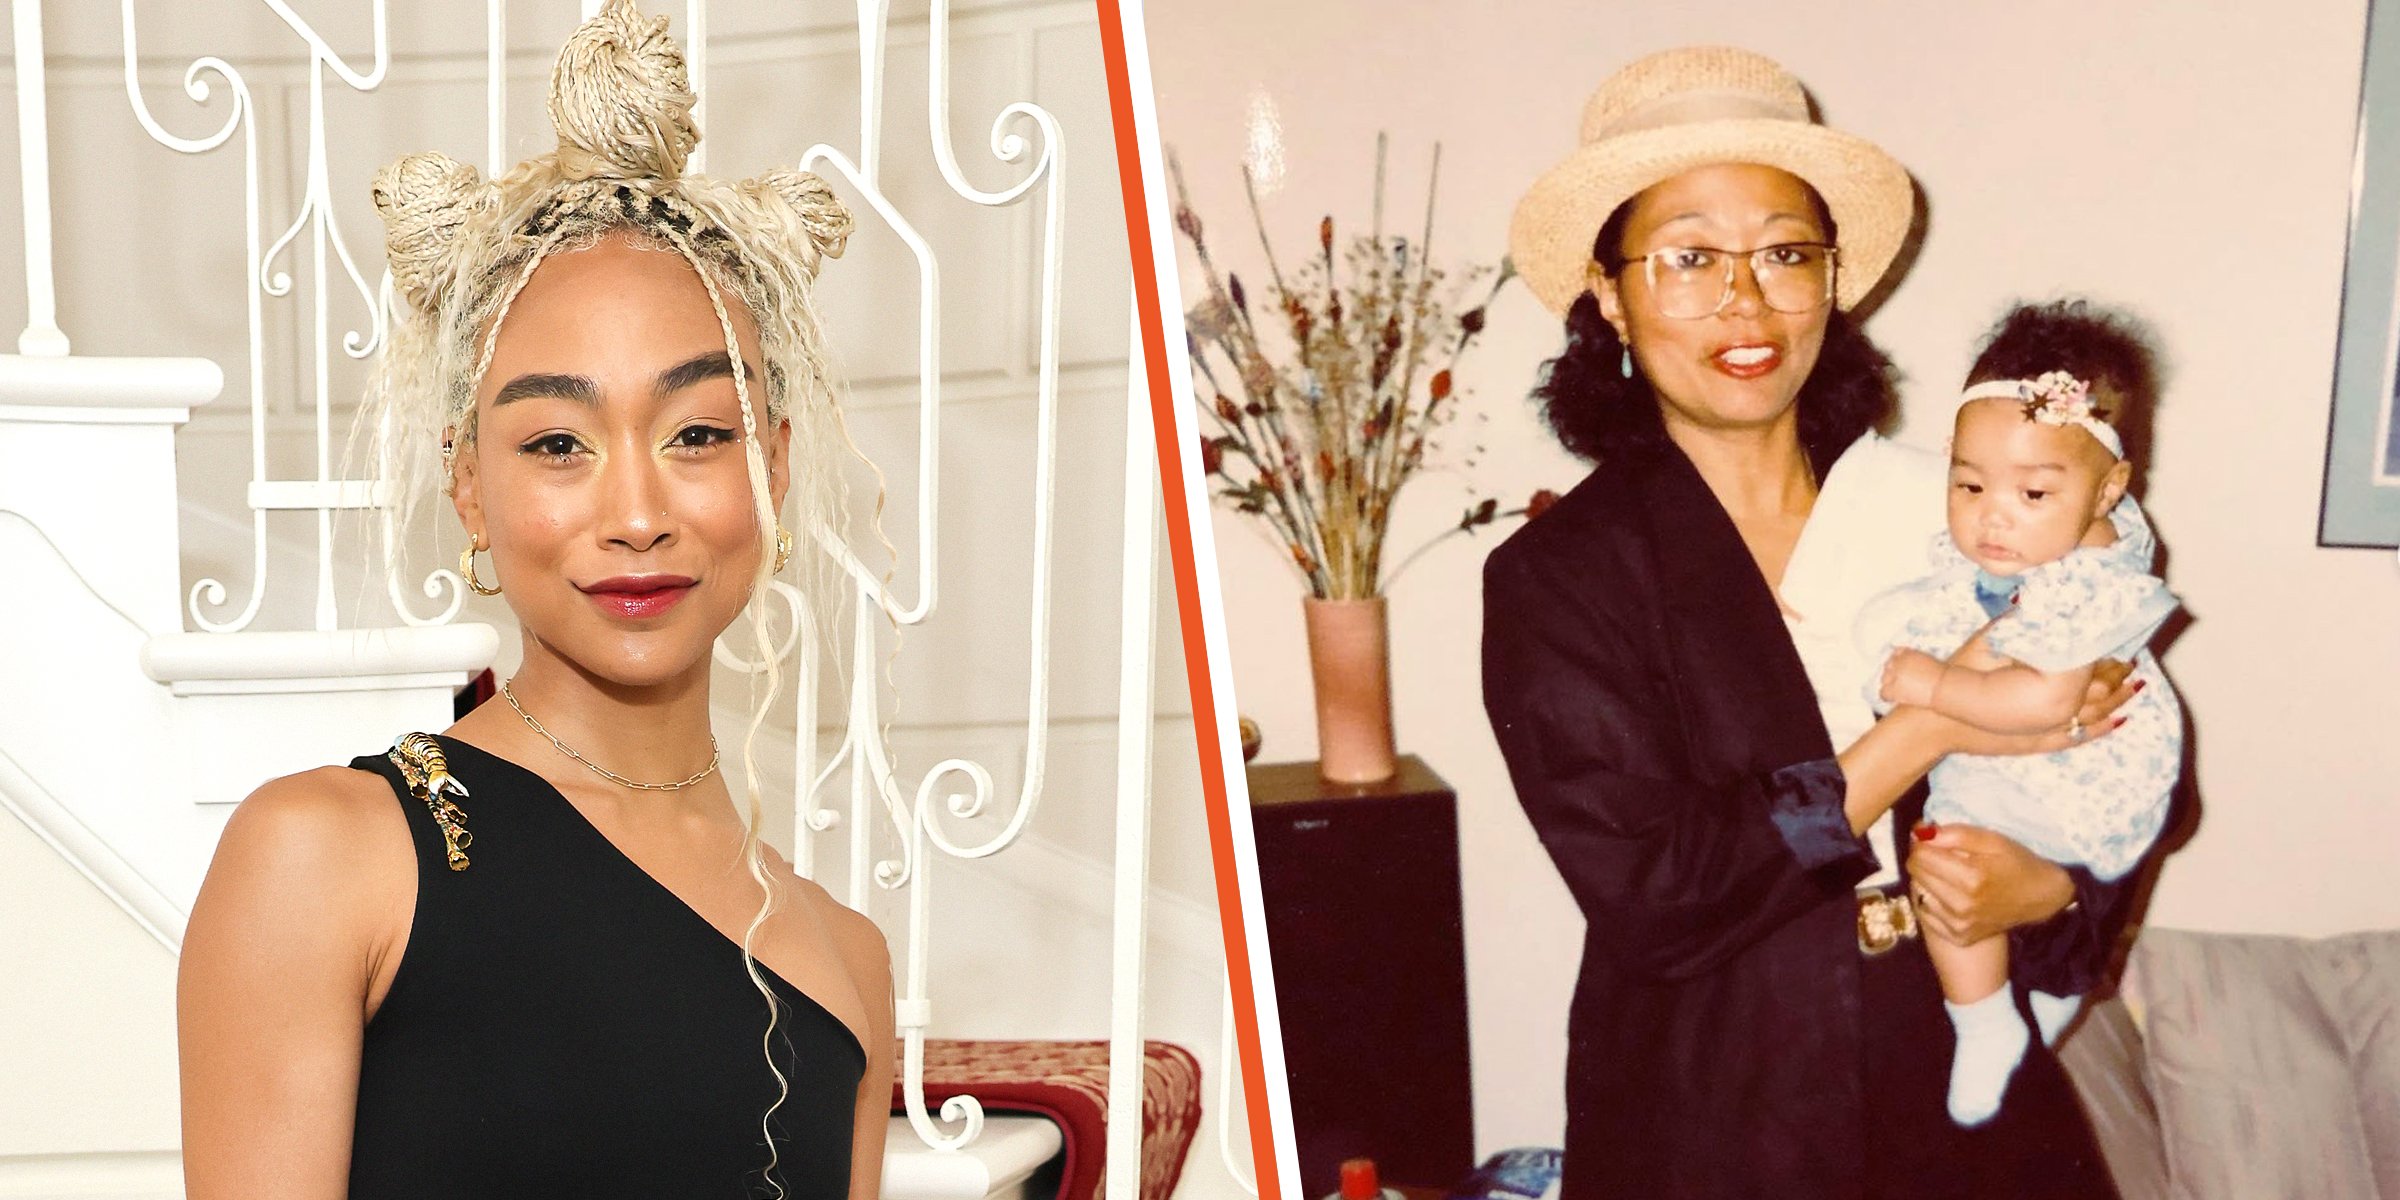 Who are Tati Gabrielles Parents? Tati Gabrielle Biography, Parents Name,  Nationality and More - News